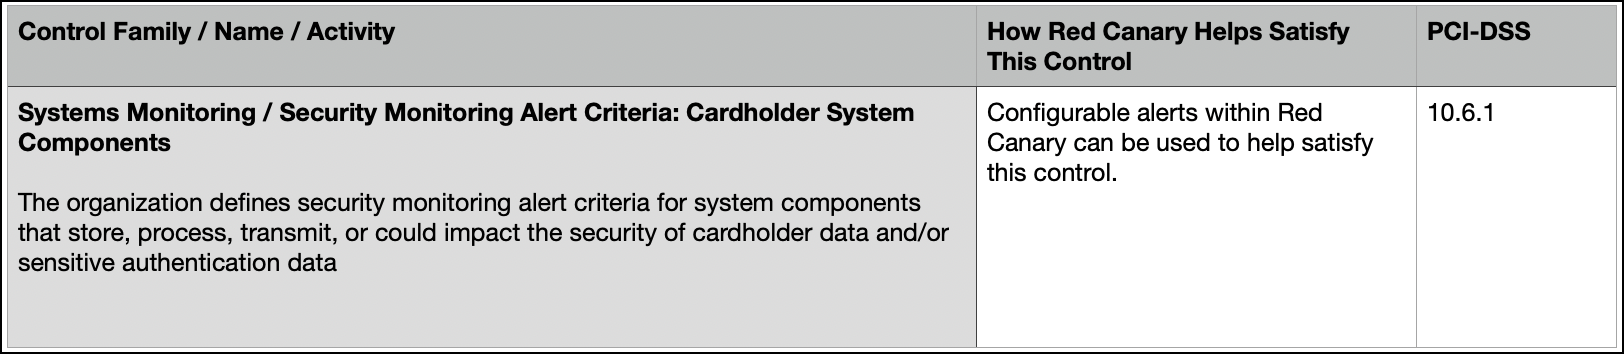 System_Monitoring_Card_holder_components.png